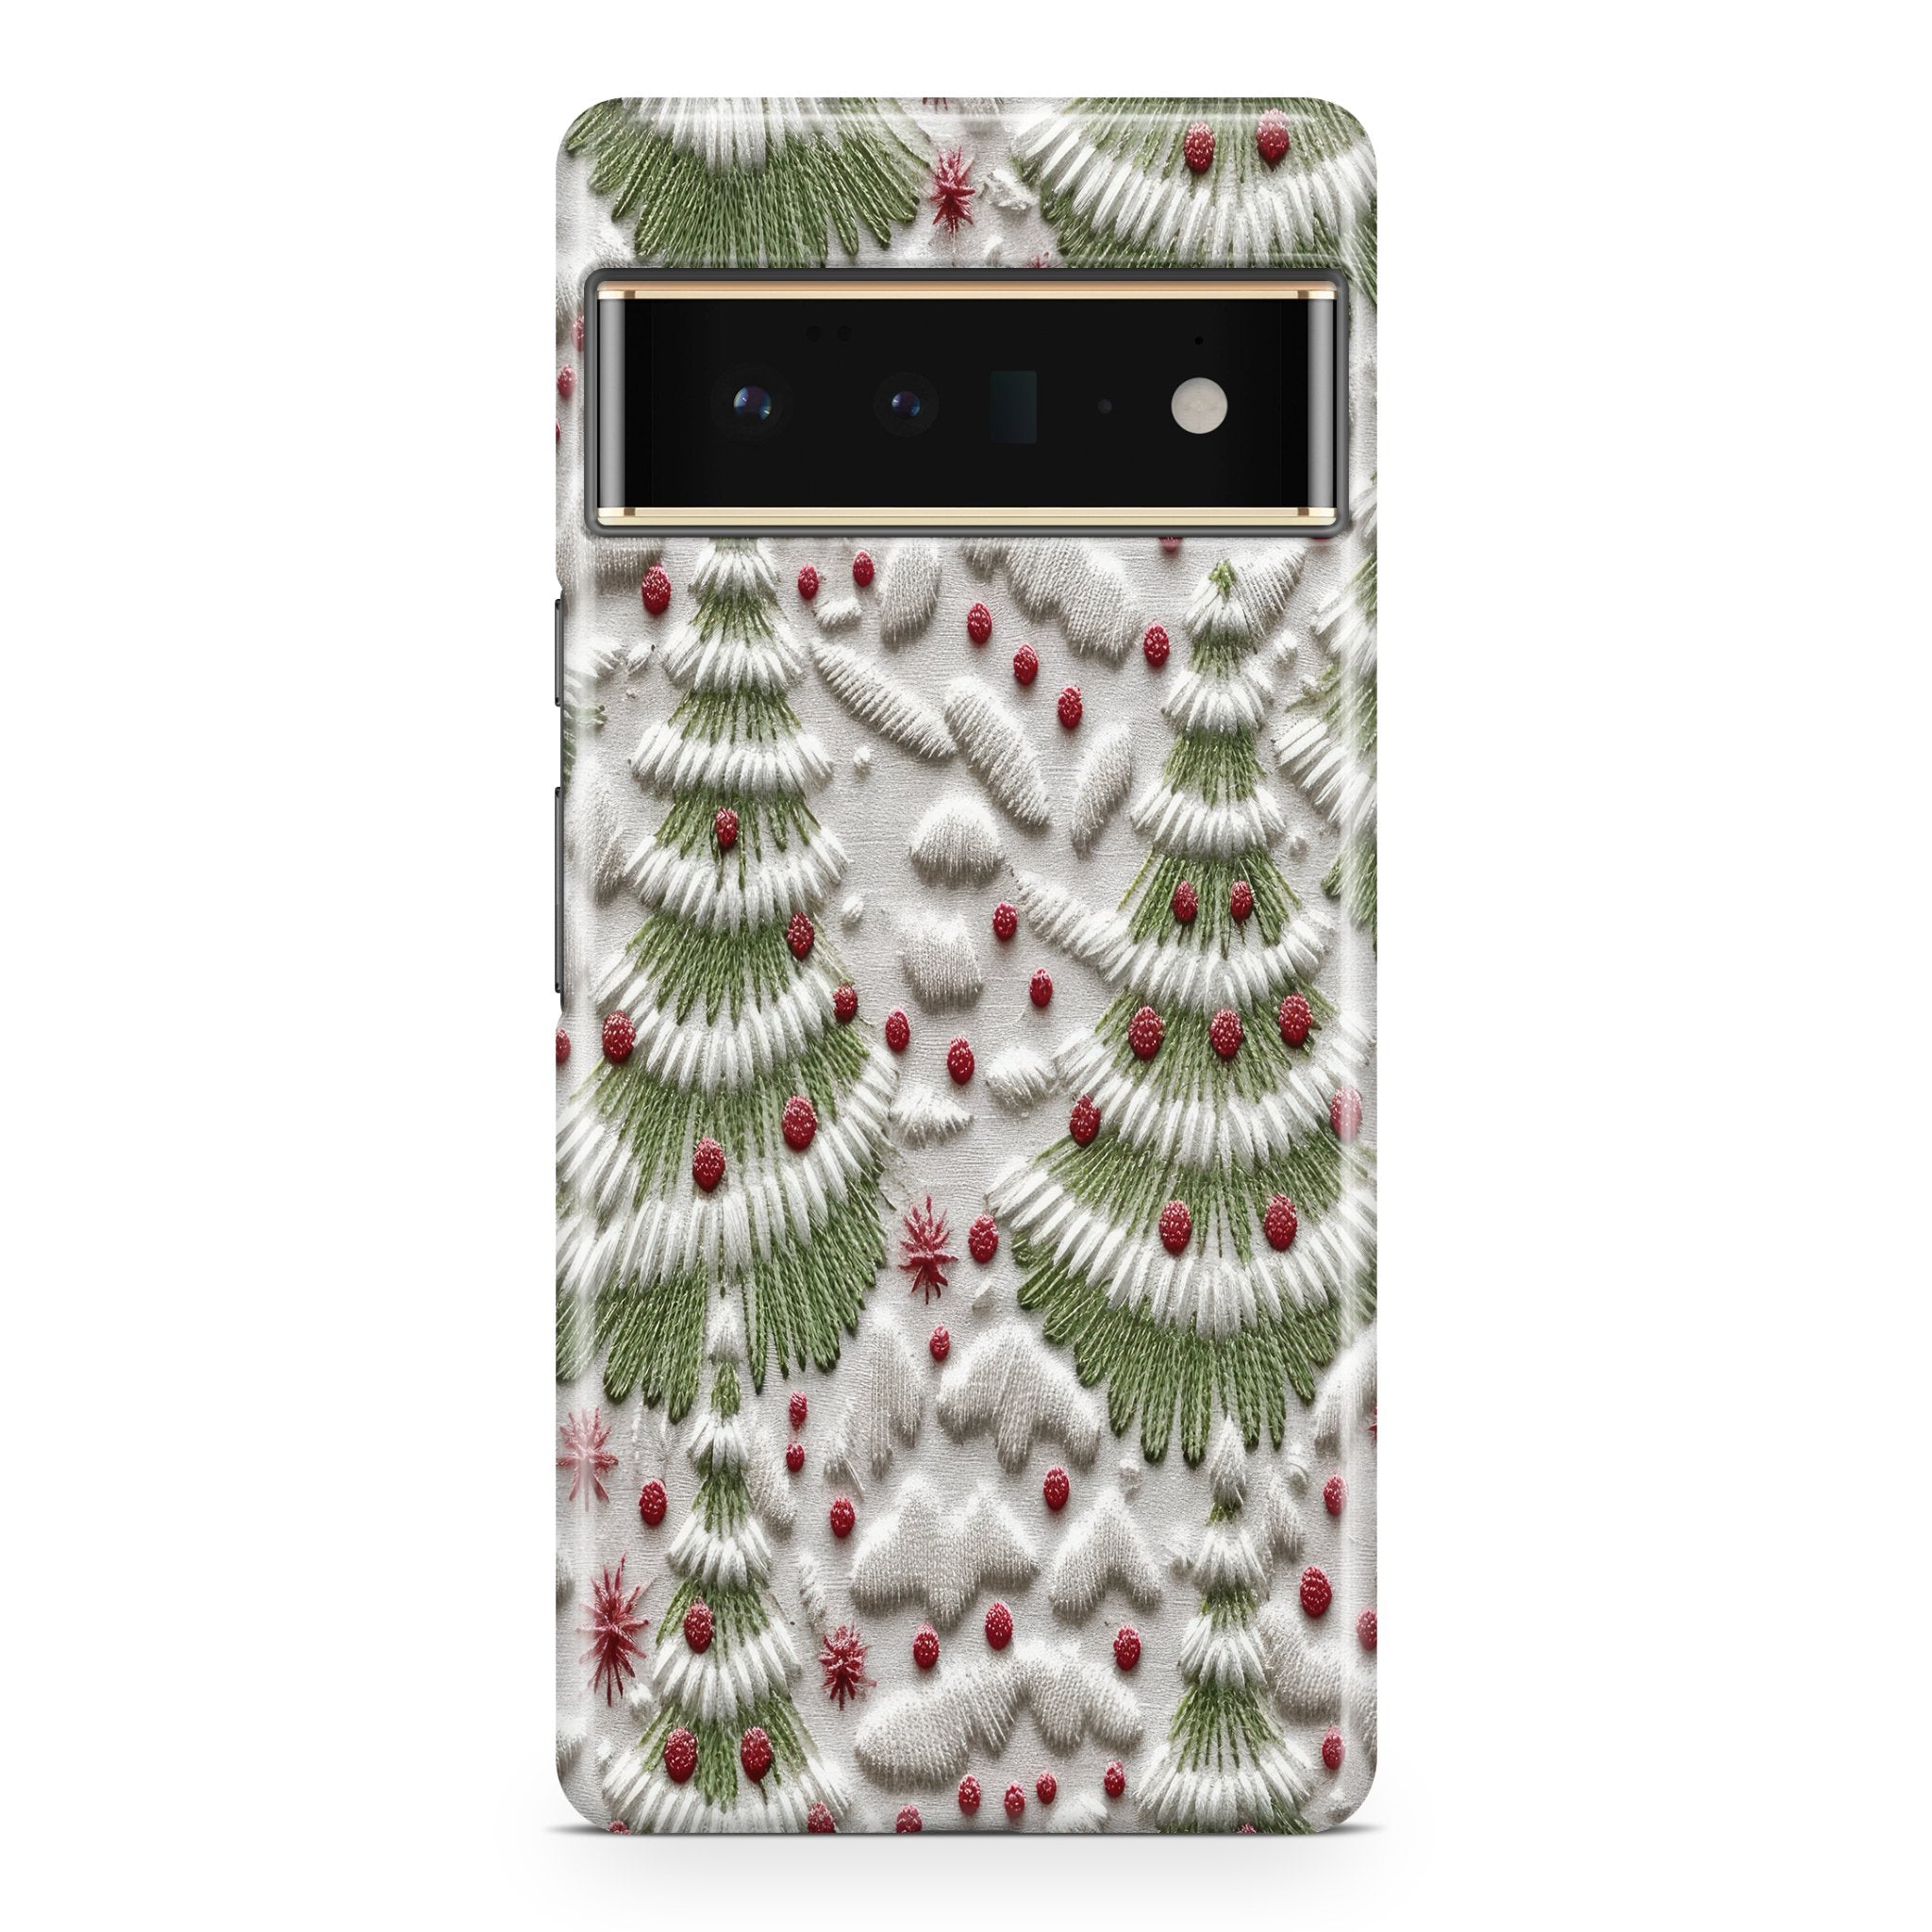 Winter Berries - Google phone case designs by CaseSwagger